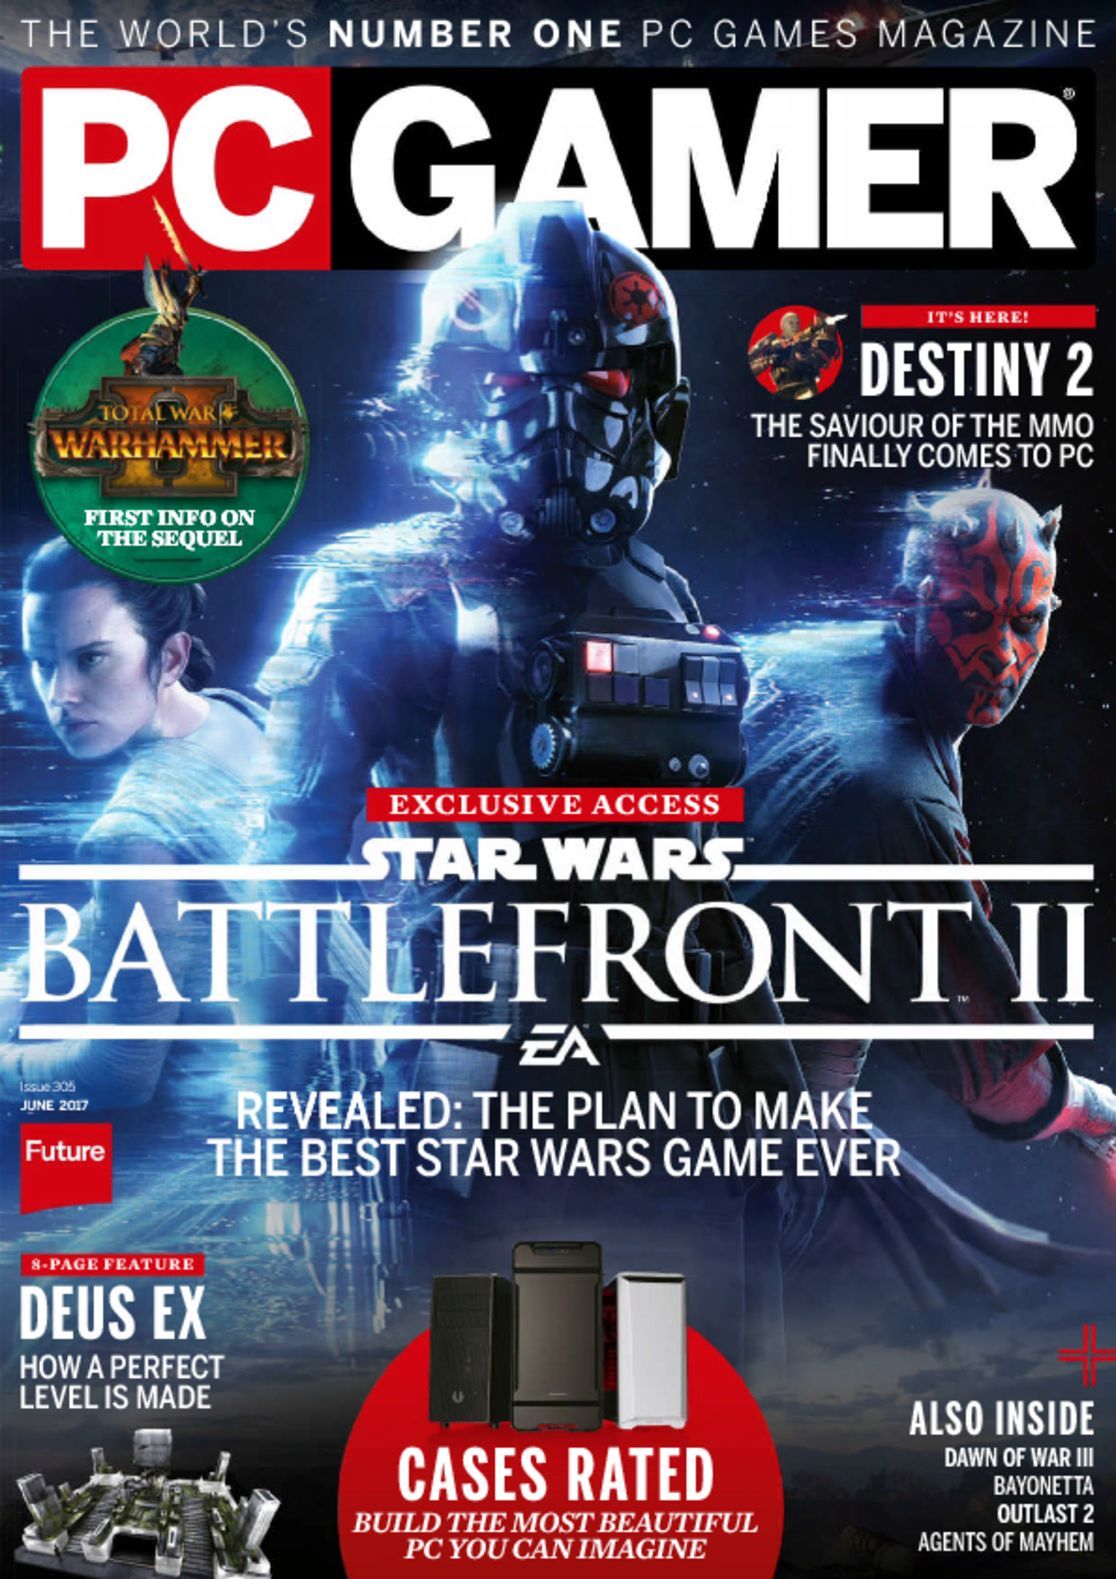 PC Gamer Magazine | The Best Computer Gaming Experience - DiscountMags.com